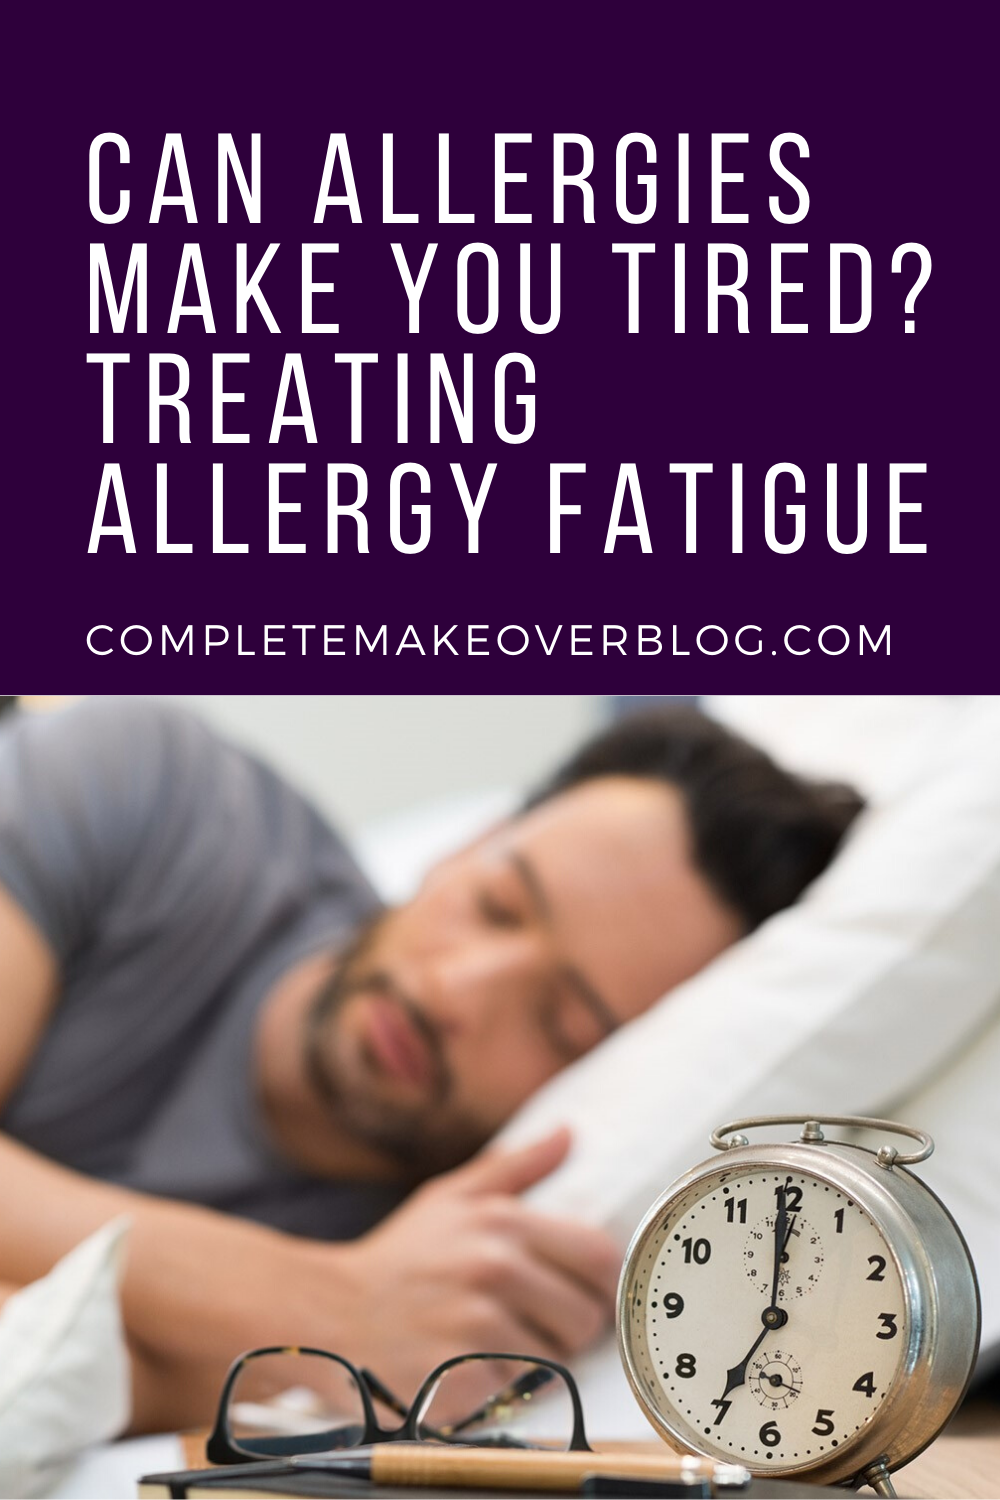 Can Allergies Make You Tired? Treating Allergy Fatigue in ...